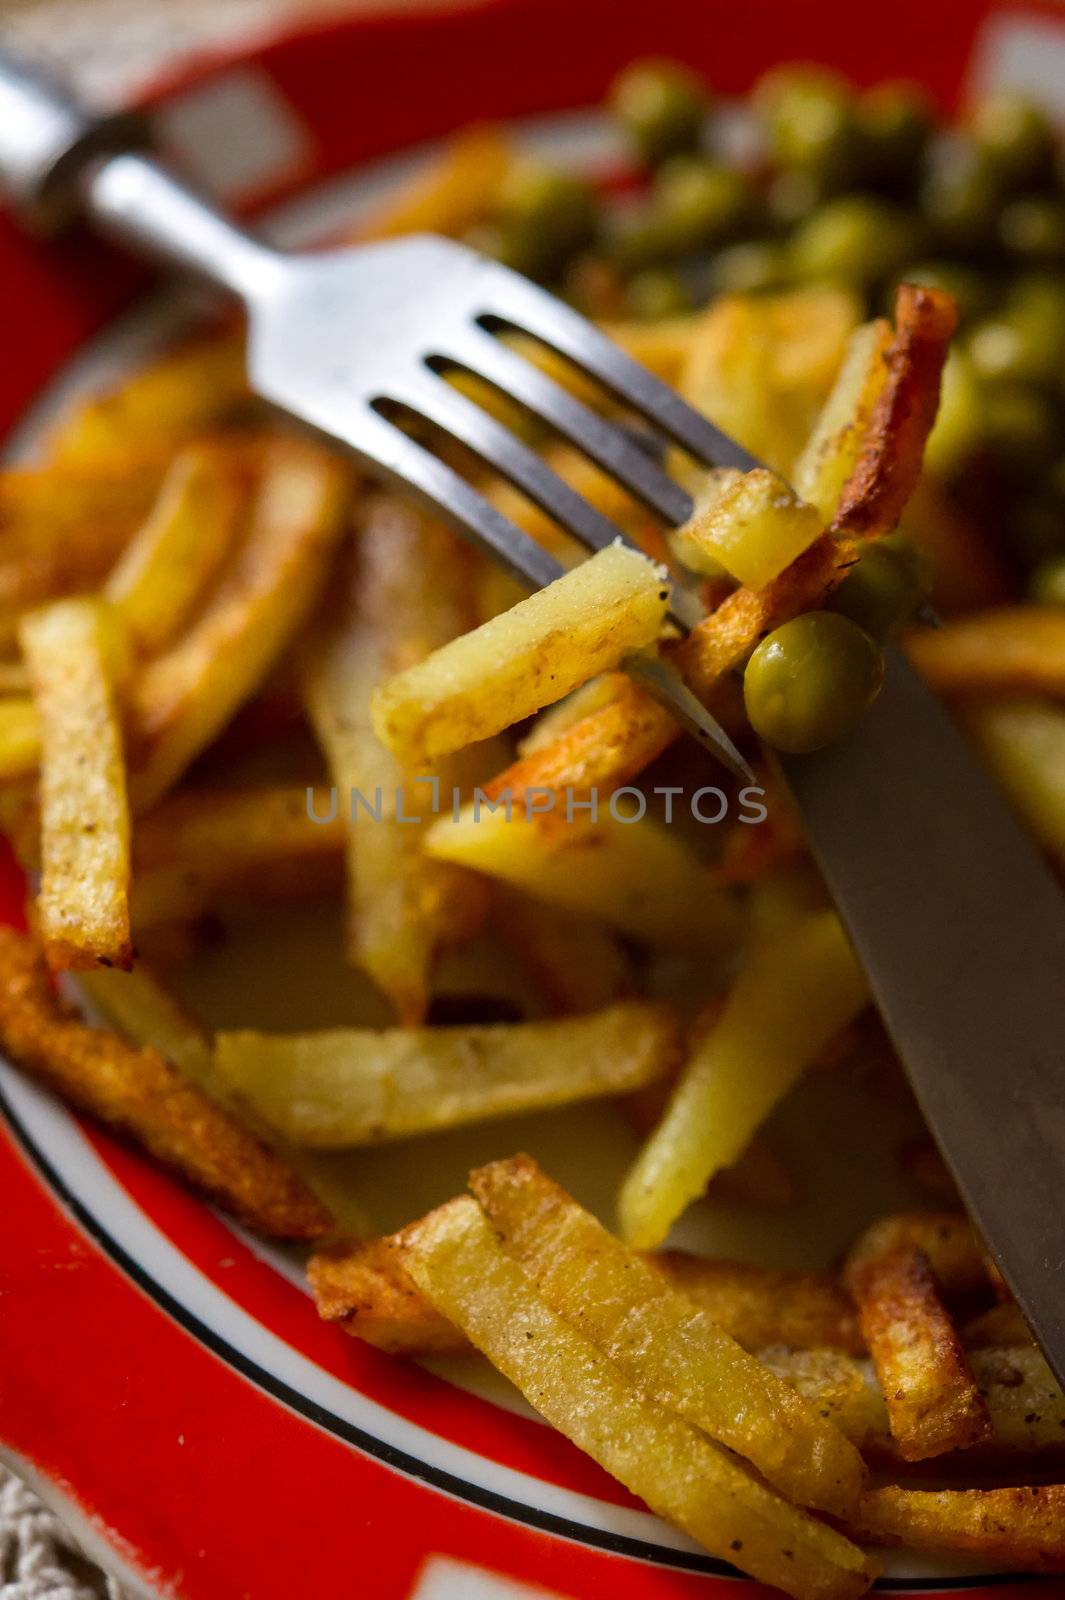 Fried potatoes with green peas by kirs-ua